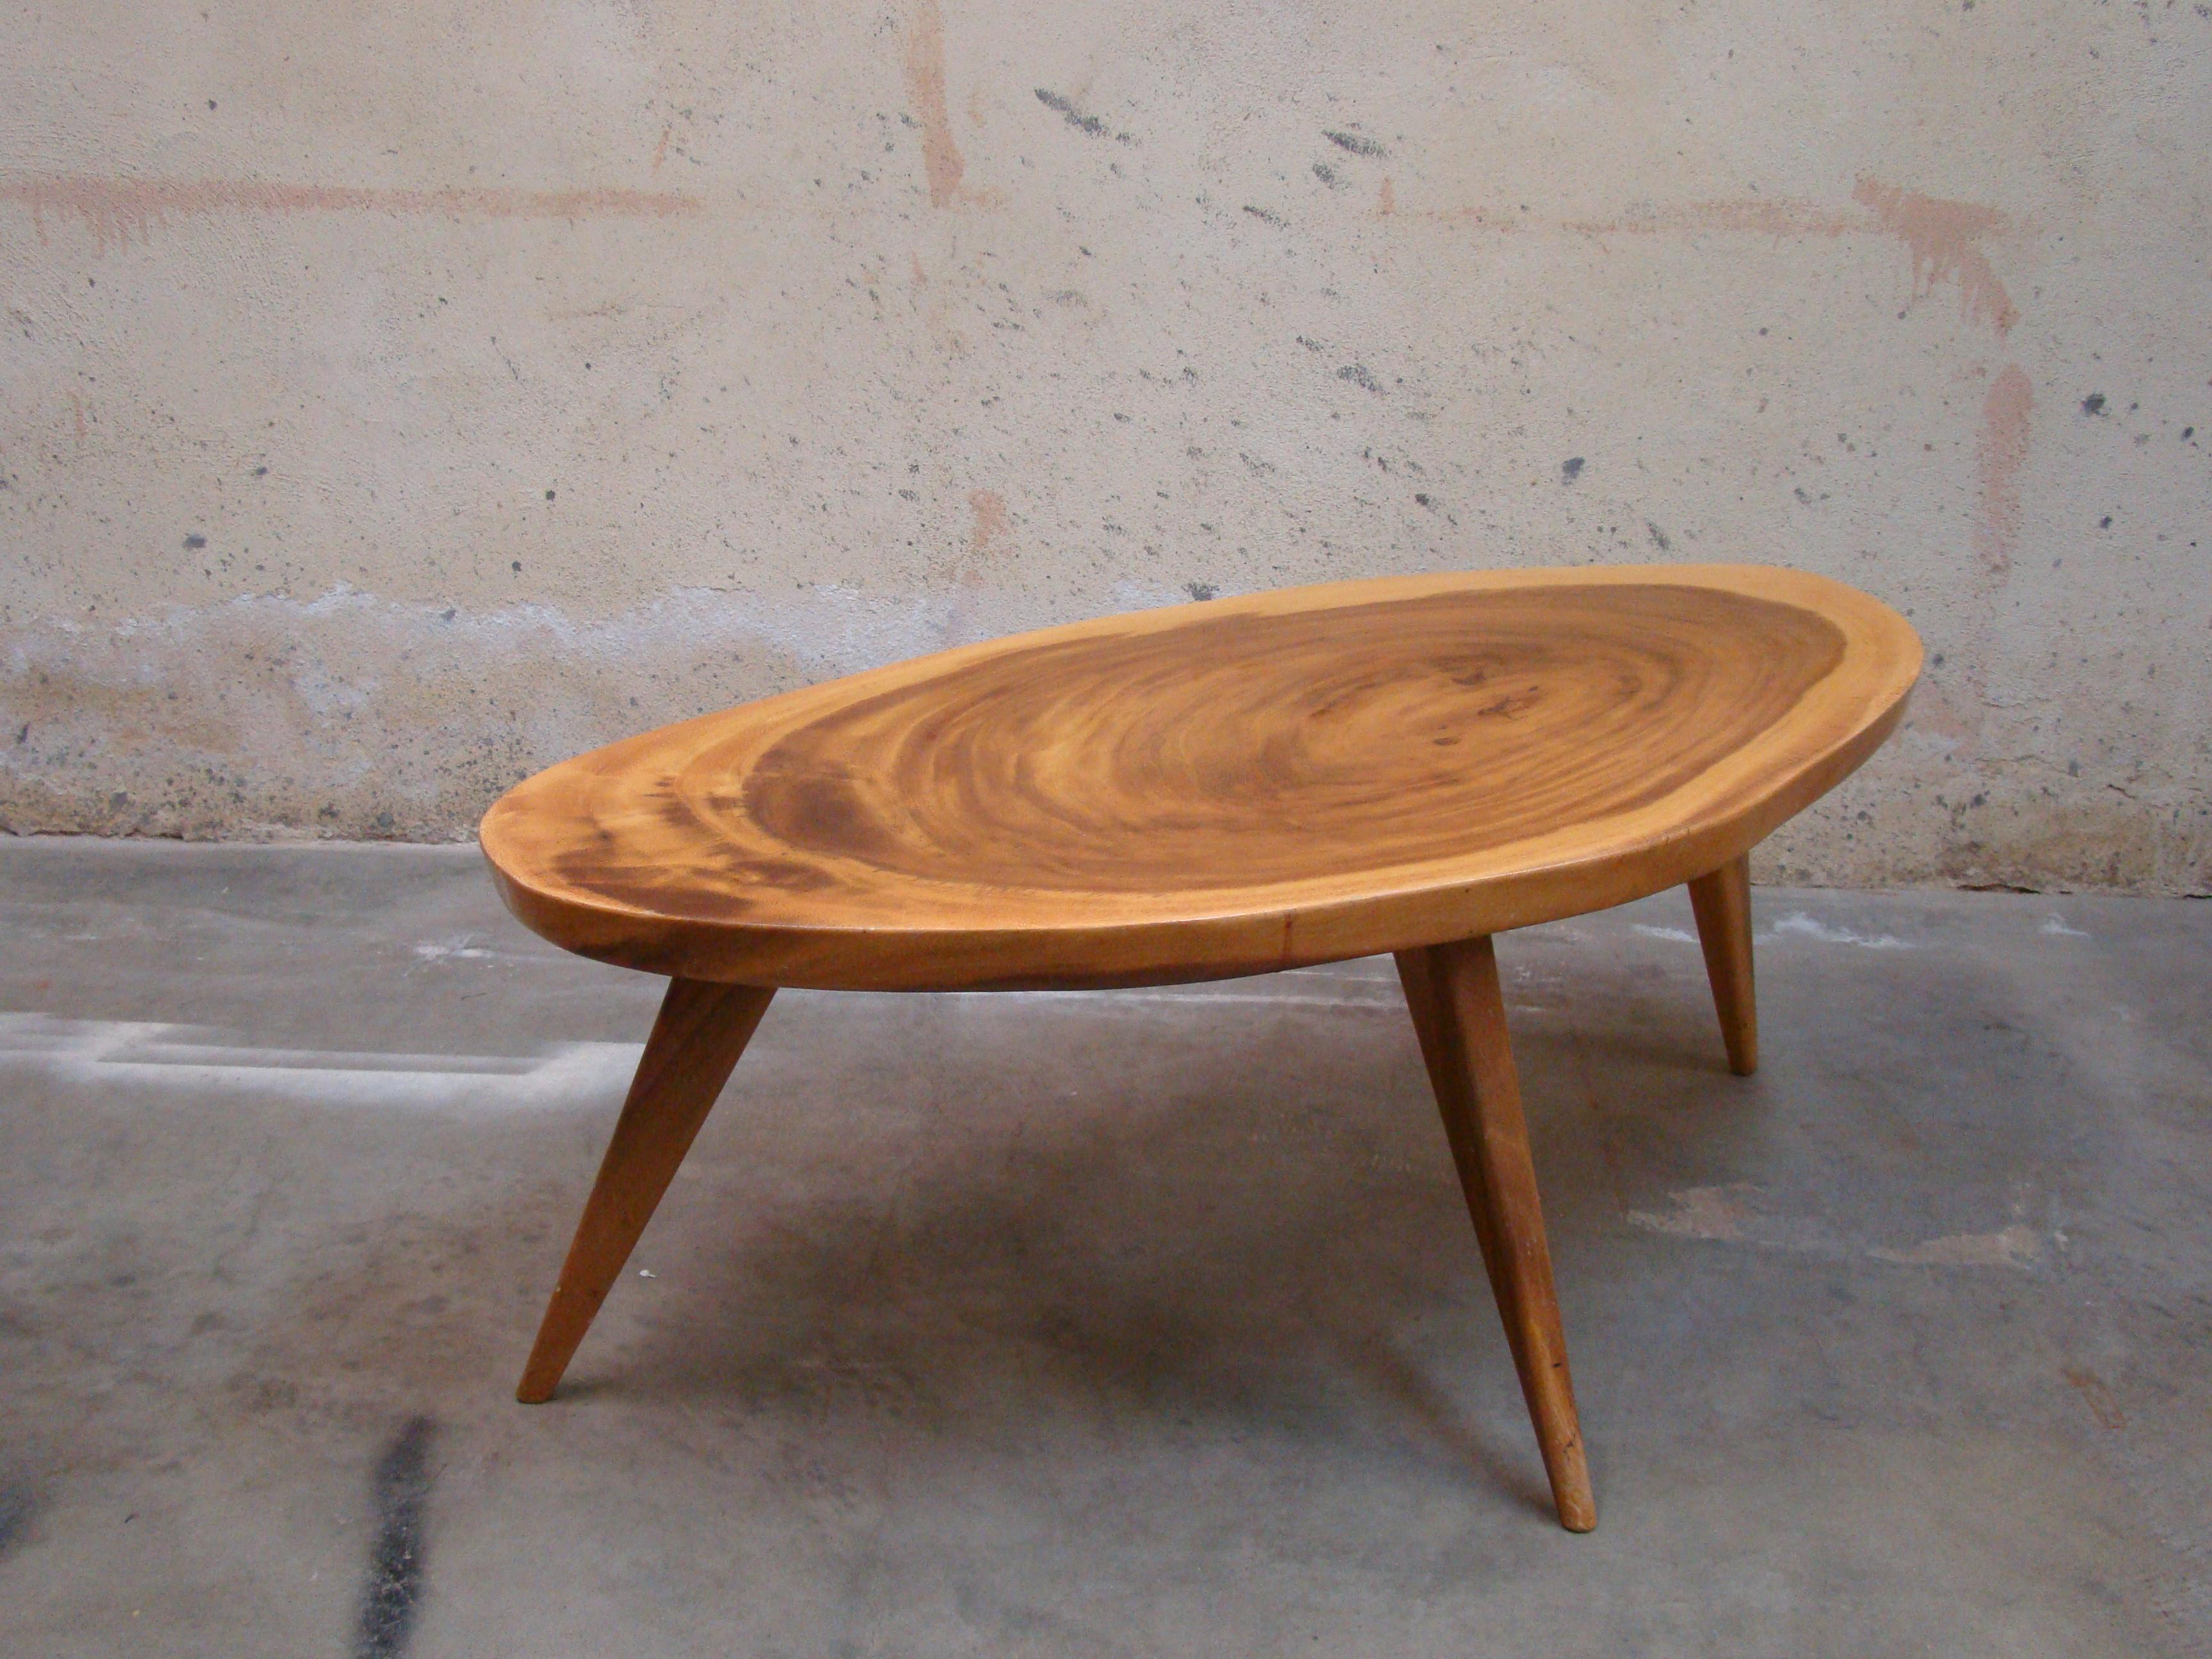 Gorgeous, live-edge table constructed in Hawaii of indigenous 'Monkeypod' wood. These tables were produced in the mid-1950s and 1960s of hand-selected, cross-cut slabs that showcased the unique 'motion' in the grain of the heartwood.

Not as